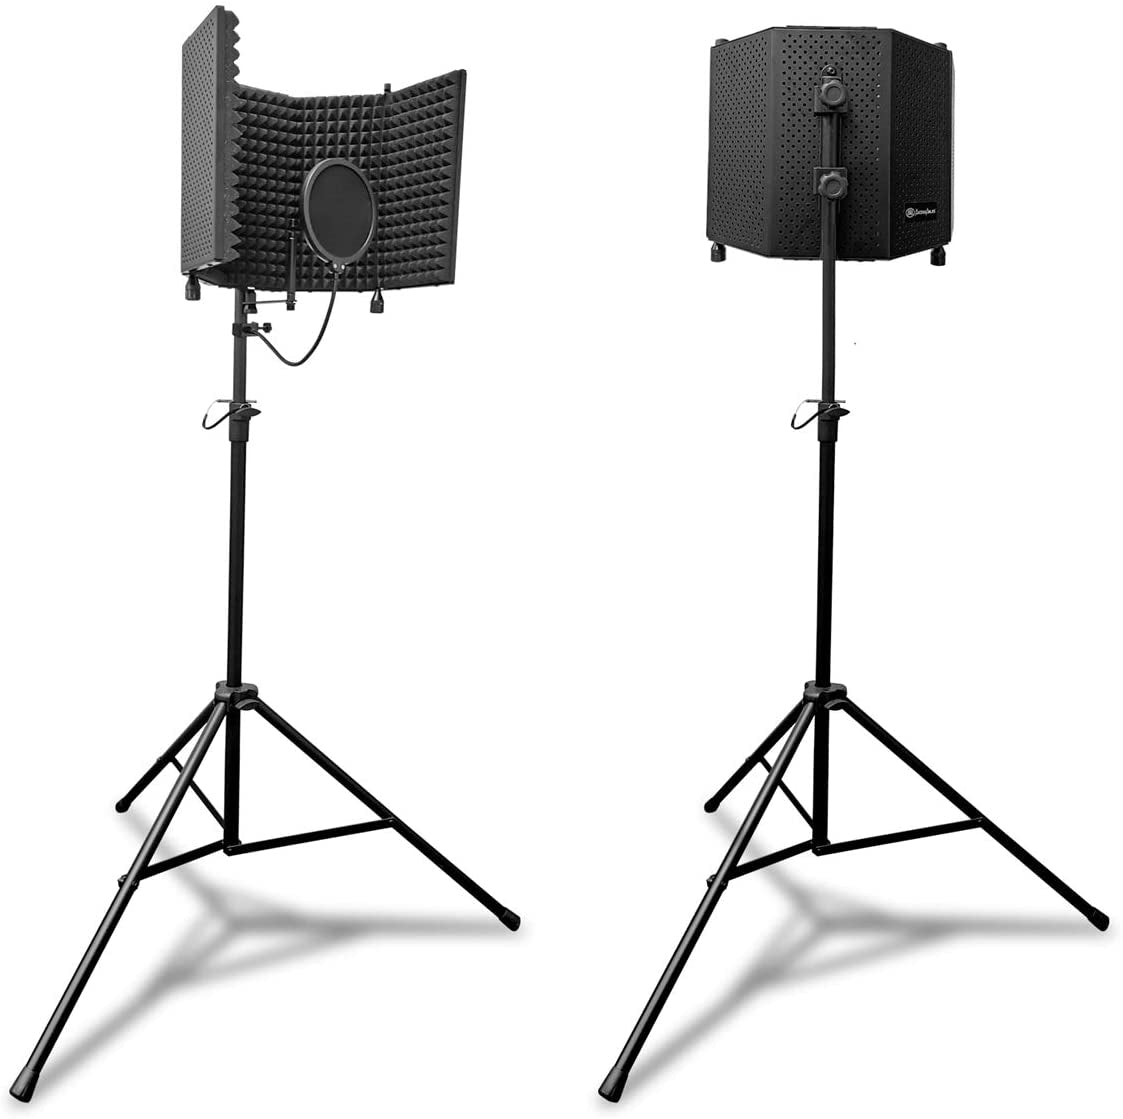 AxcessAbles SF-101KIT-VB Vented 32.5"Wx13"H (422sq inch) Half Dome Professional Grade Recording Studio Microphone Isolation Shield with Stand 4ft to 6ft6"(Black)